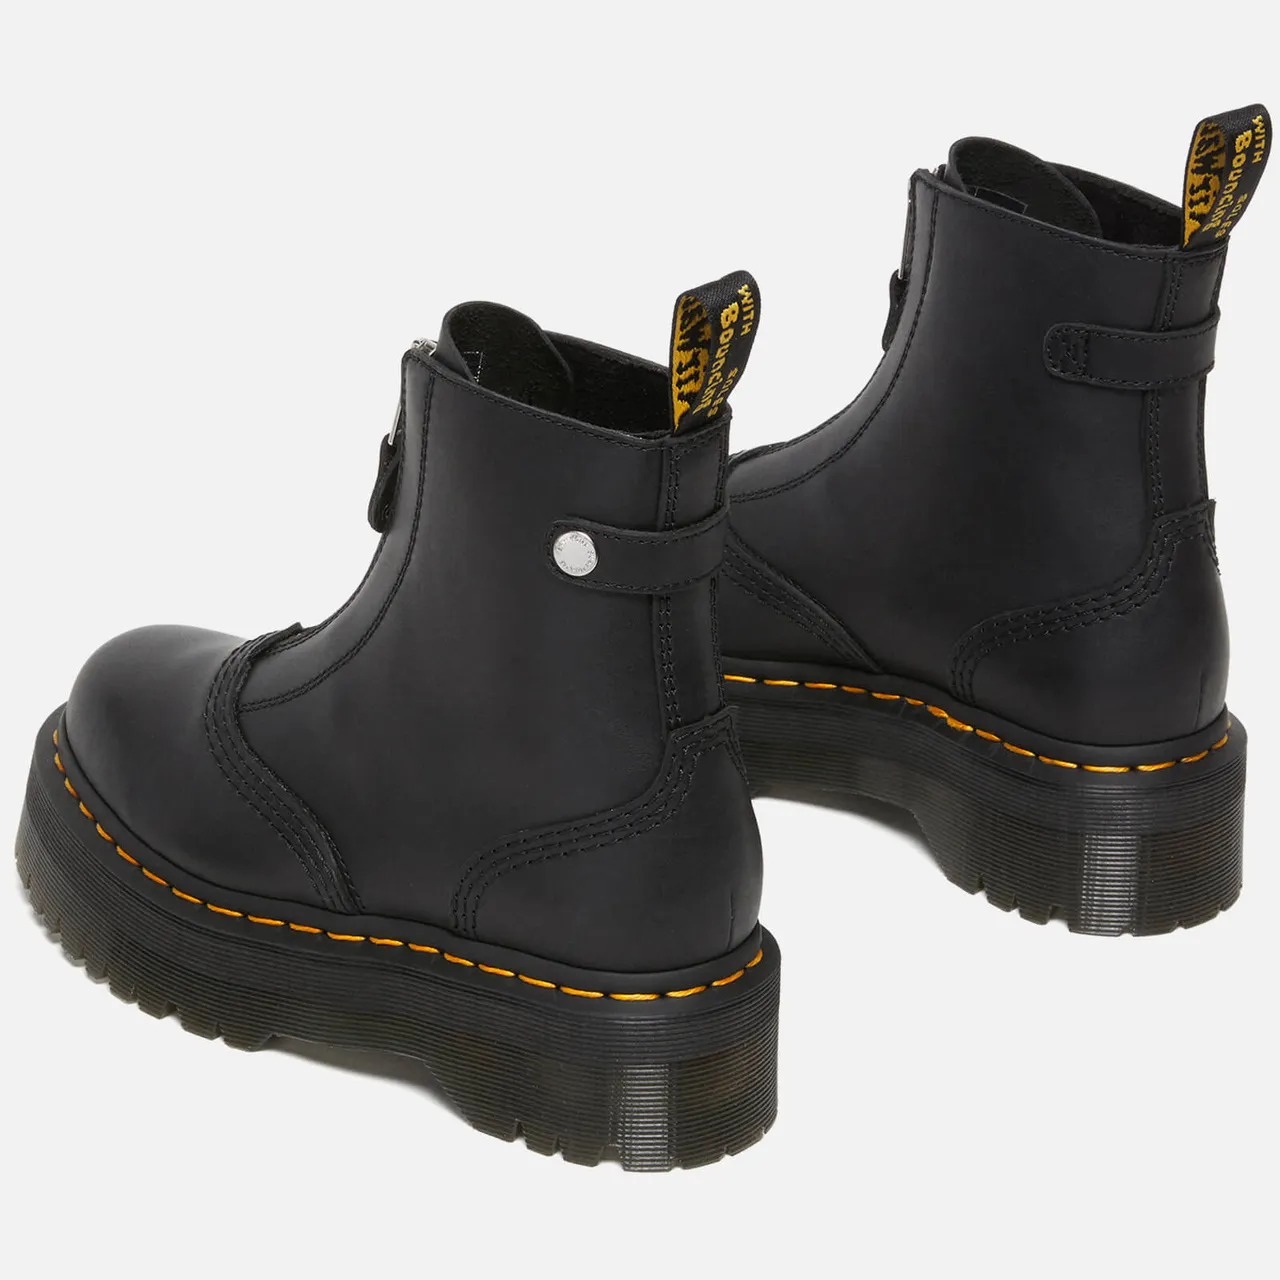 Dr. Martens Jetta Zip Front Leather Boots - UK